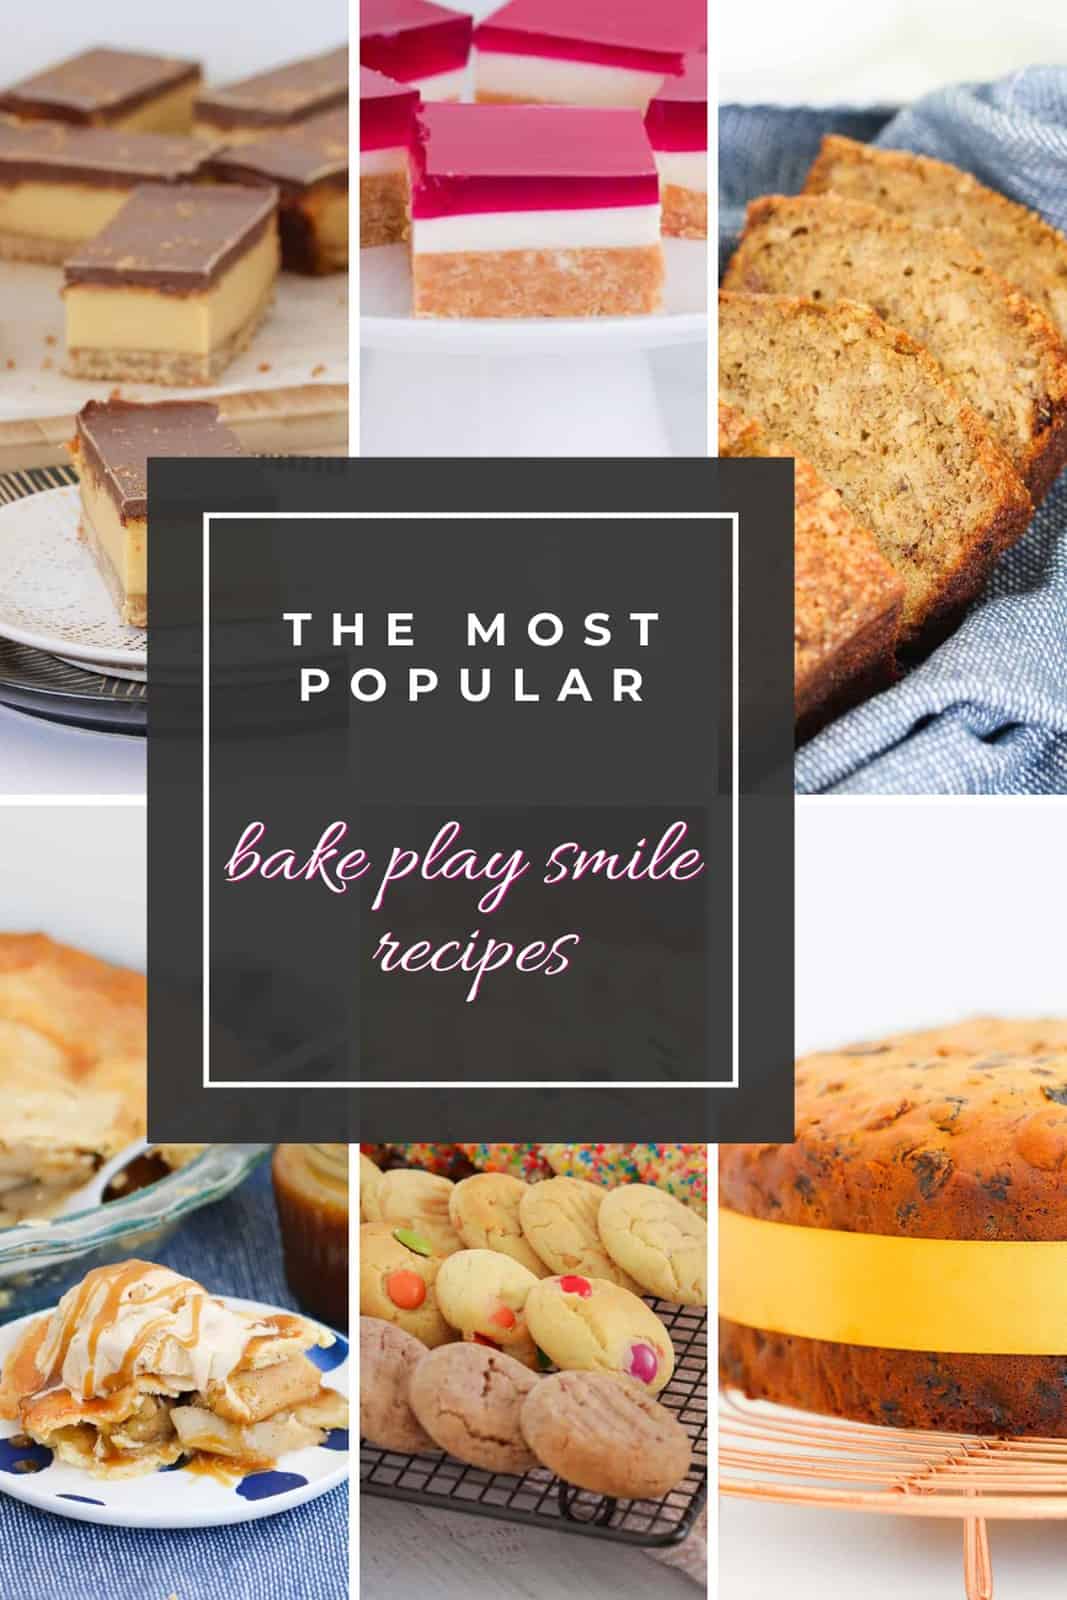 A collage of popular baking recipes from banana bread to fruit cake, cookies to apple pie, and caramel slice to jelly slice.